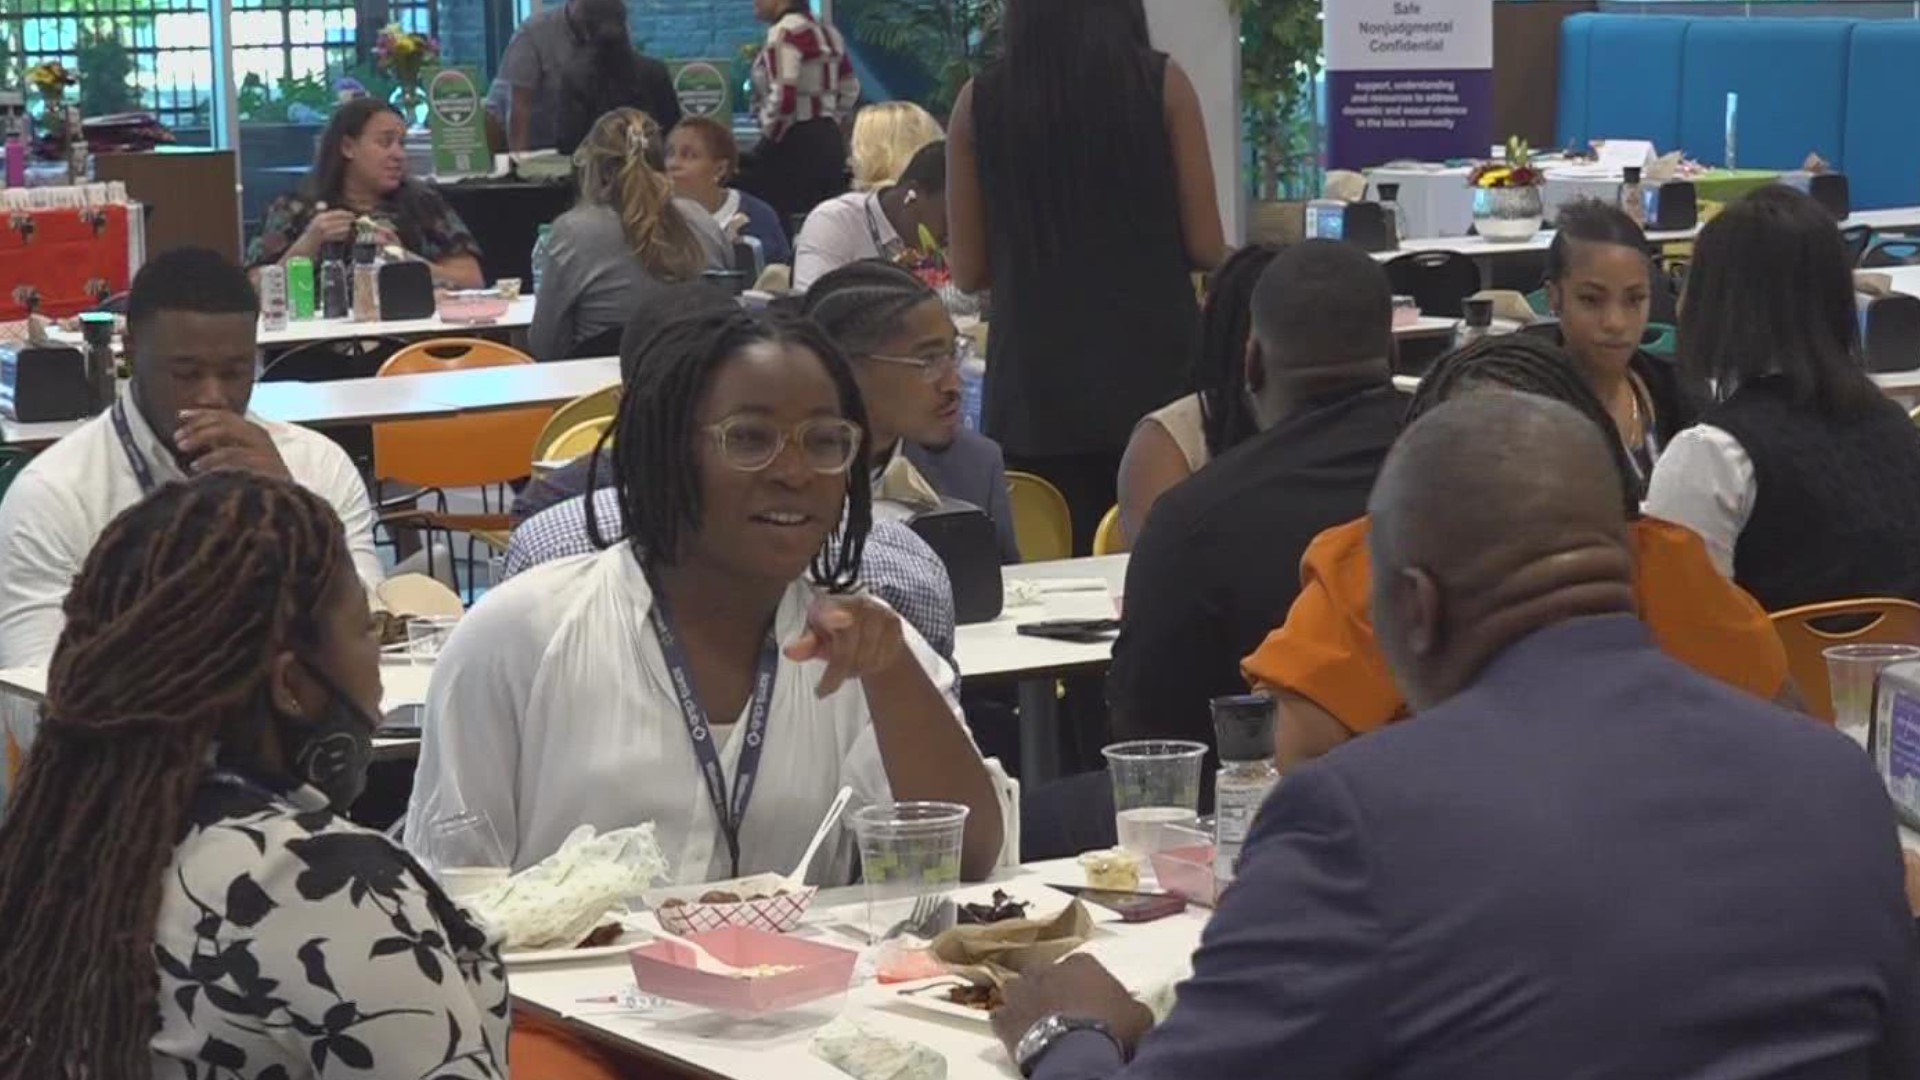 For the first time ever, Walmart & Sam's Club hosted a student summit for historically black colleges and universities also known as HBCUs.